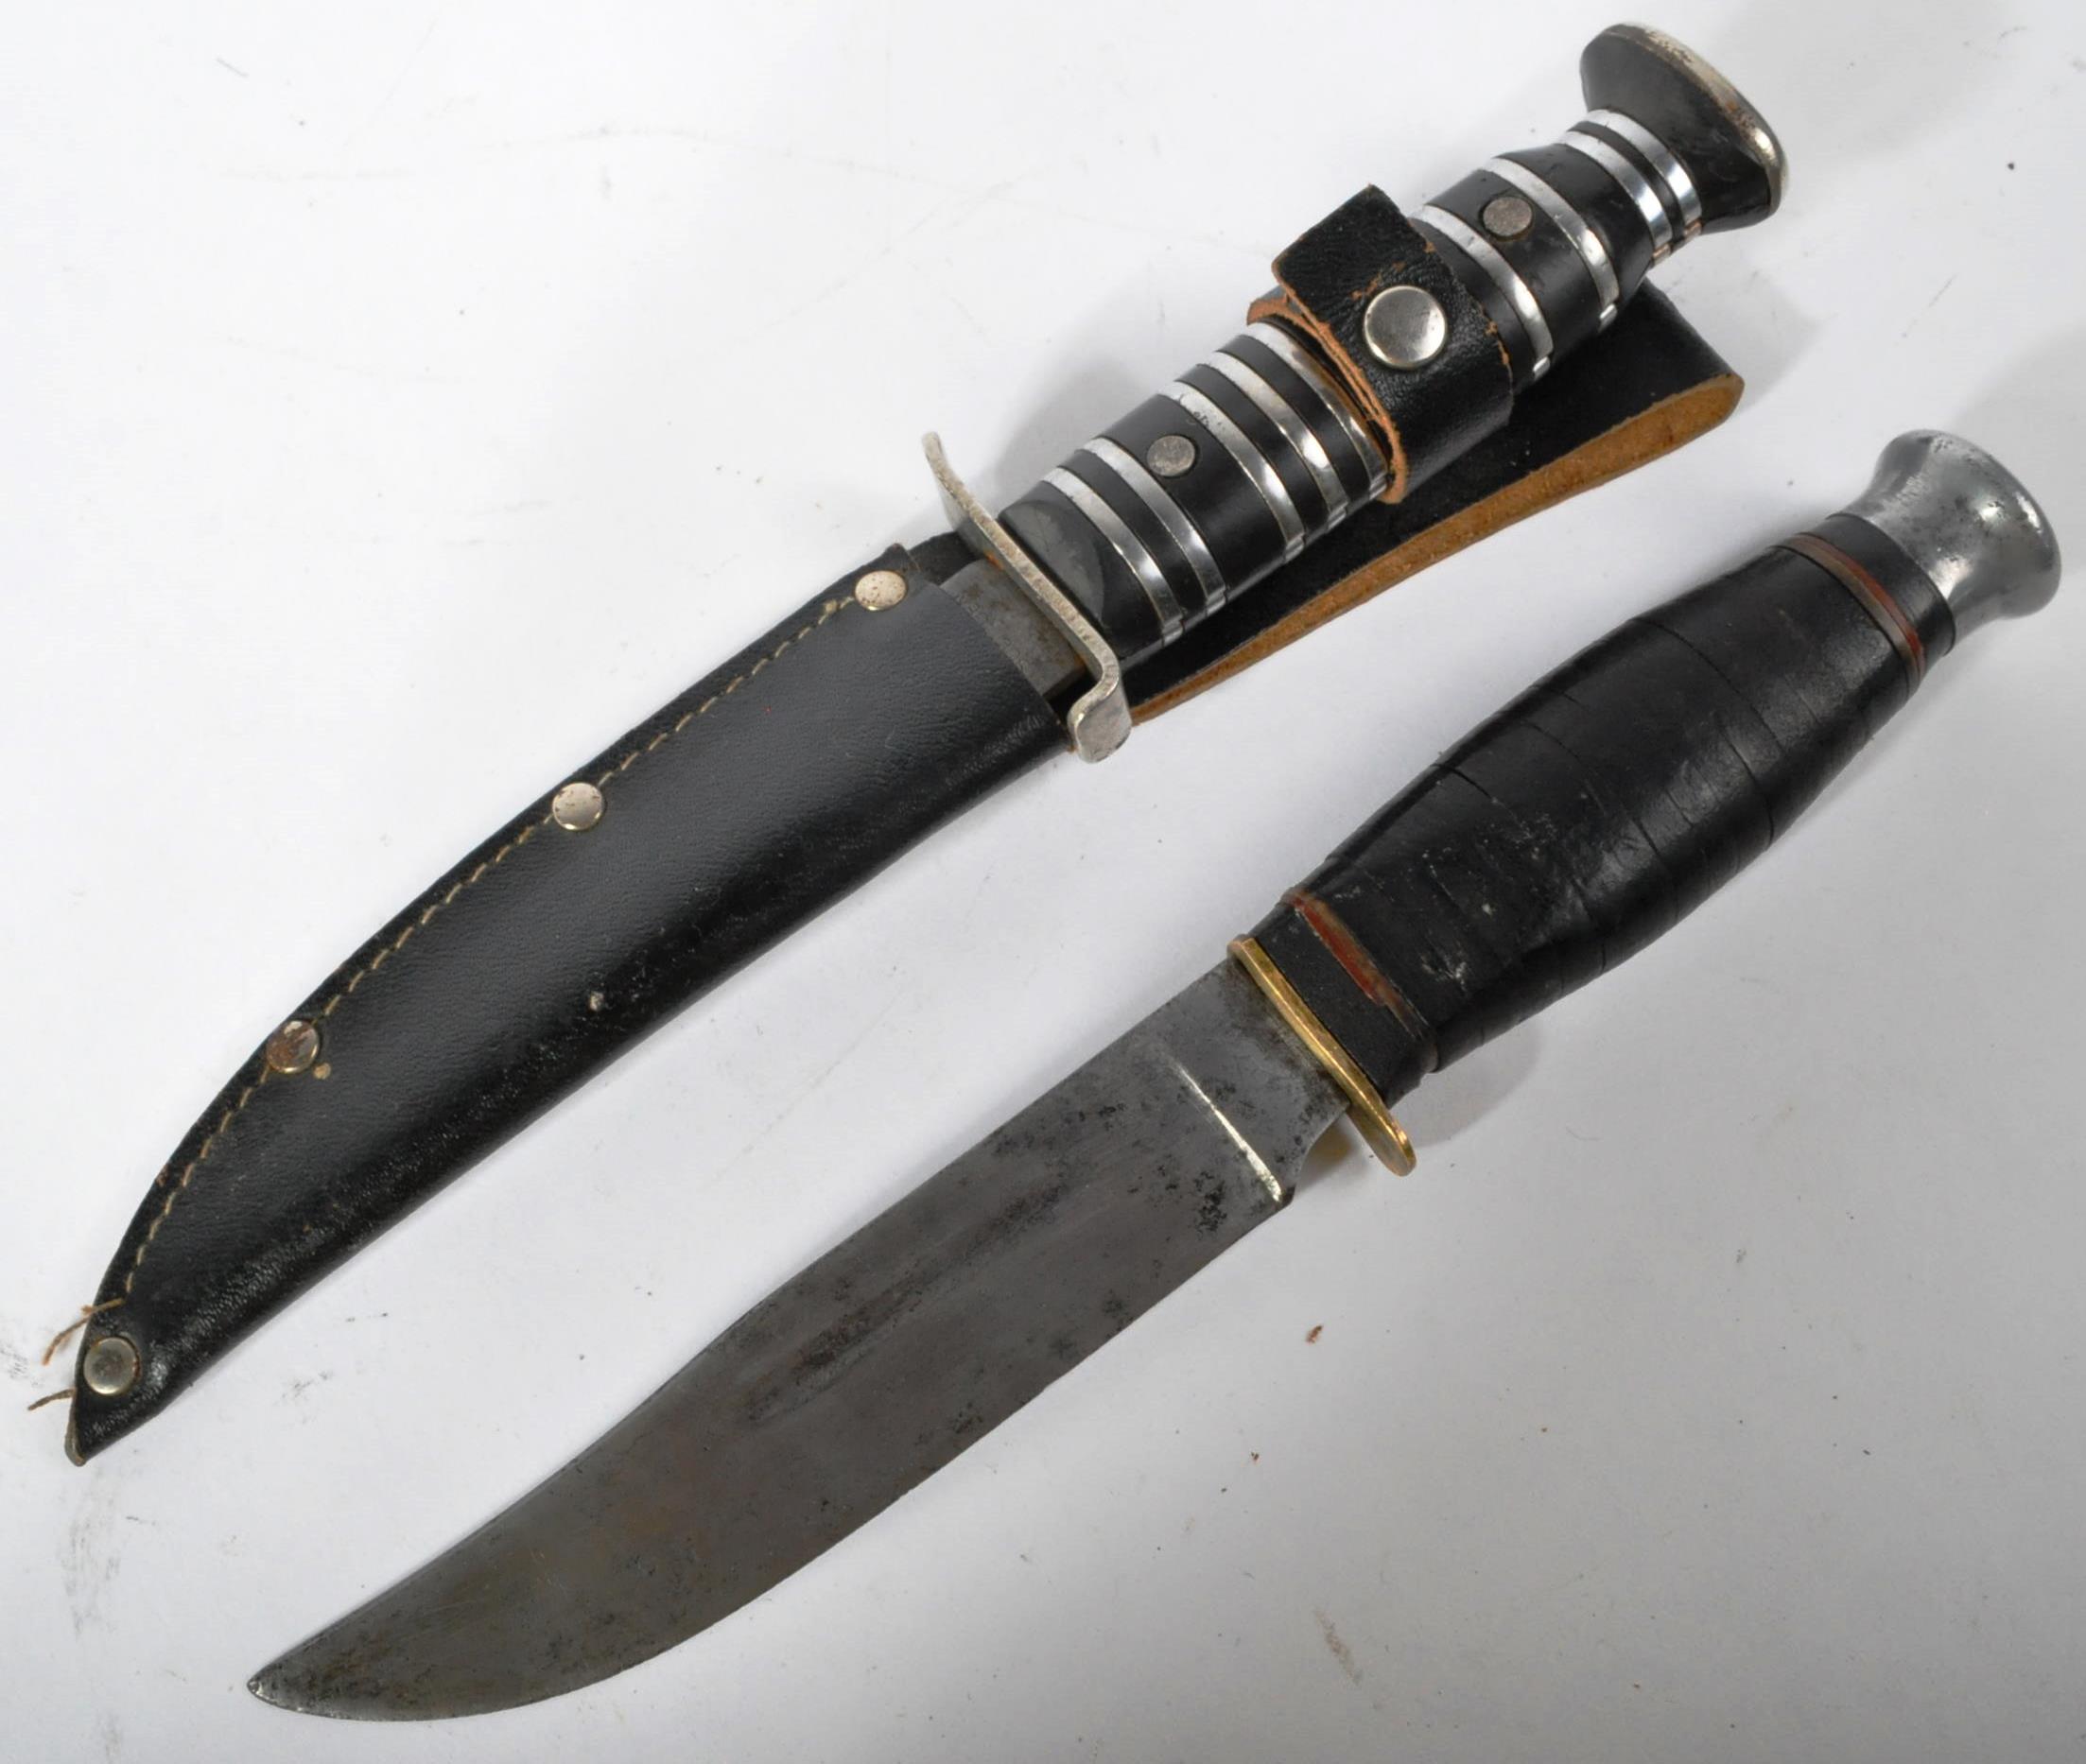 TWO WWII SECOND WORLD WAR THIRD REICH NAZI GERMAN TRENCH KNIVES - Image 7 of 7